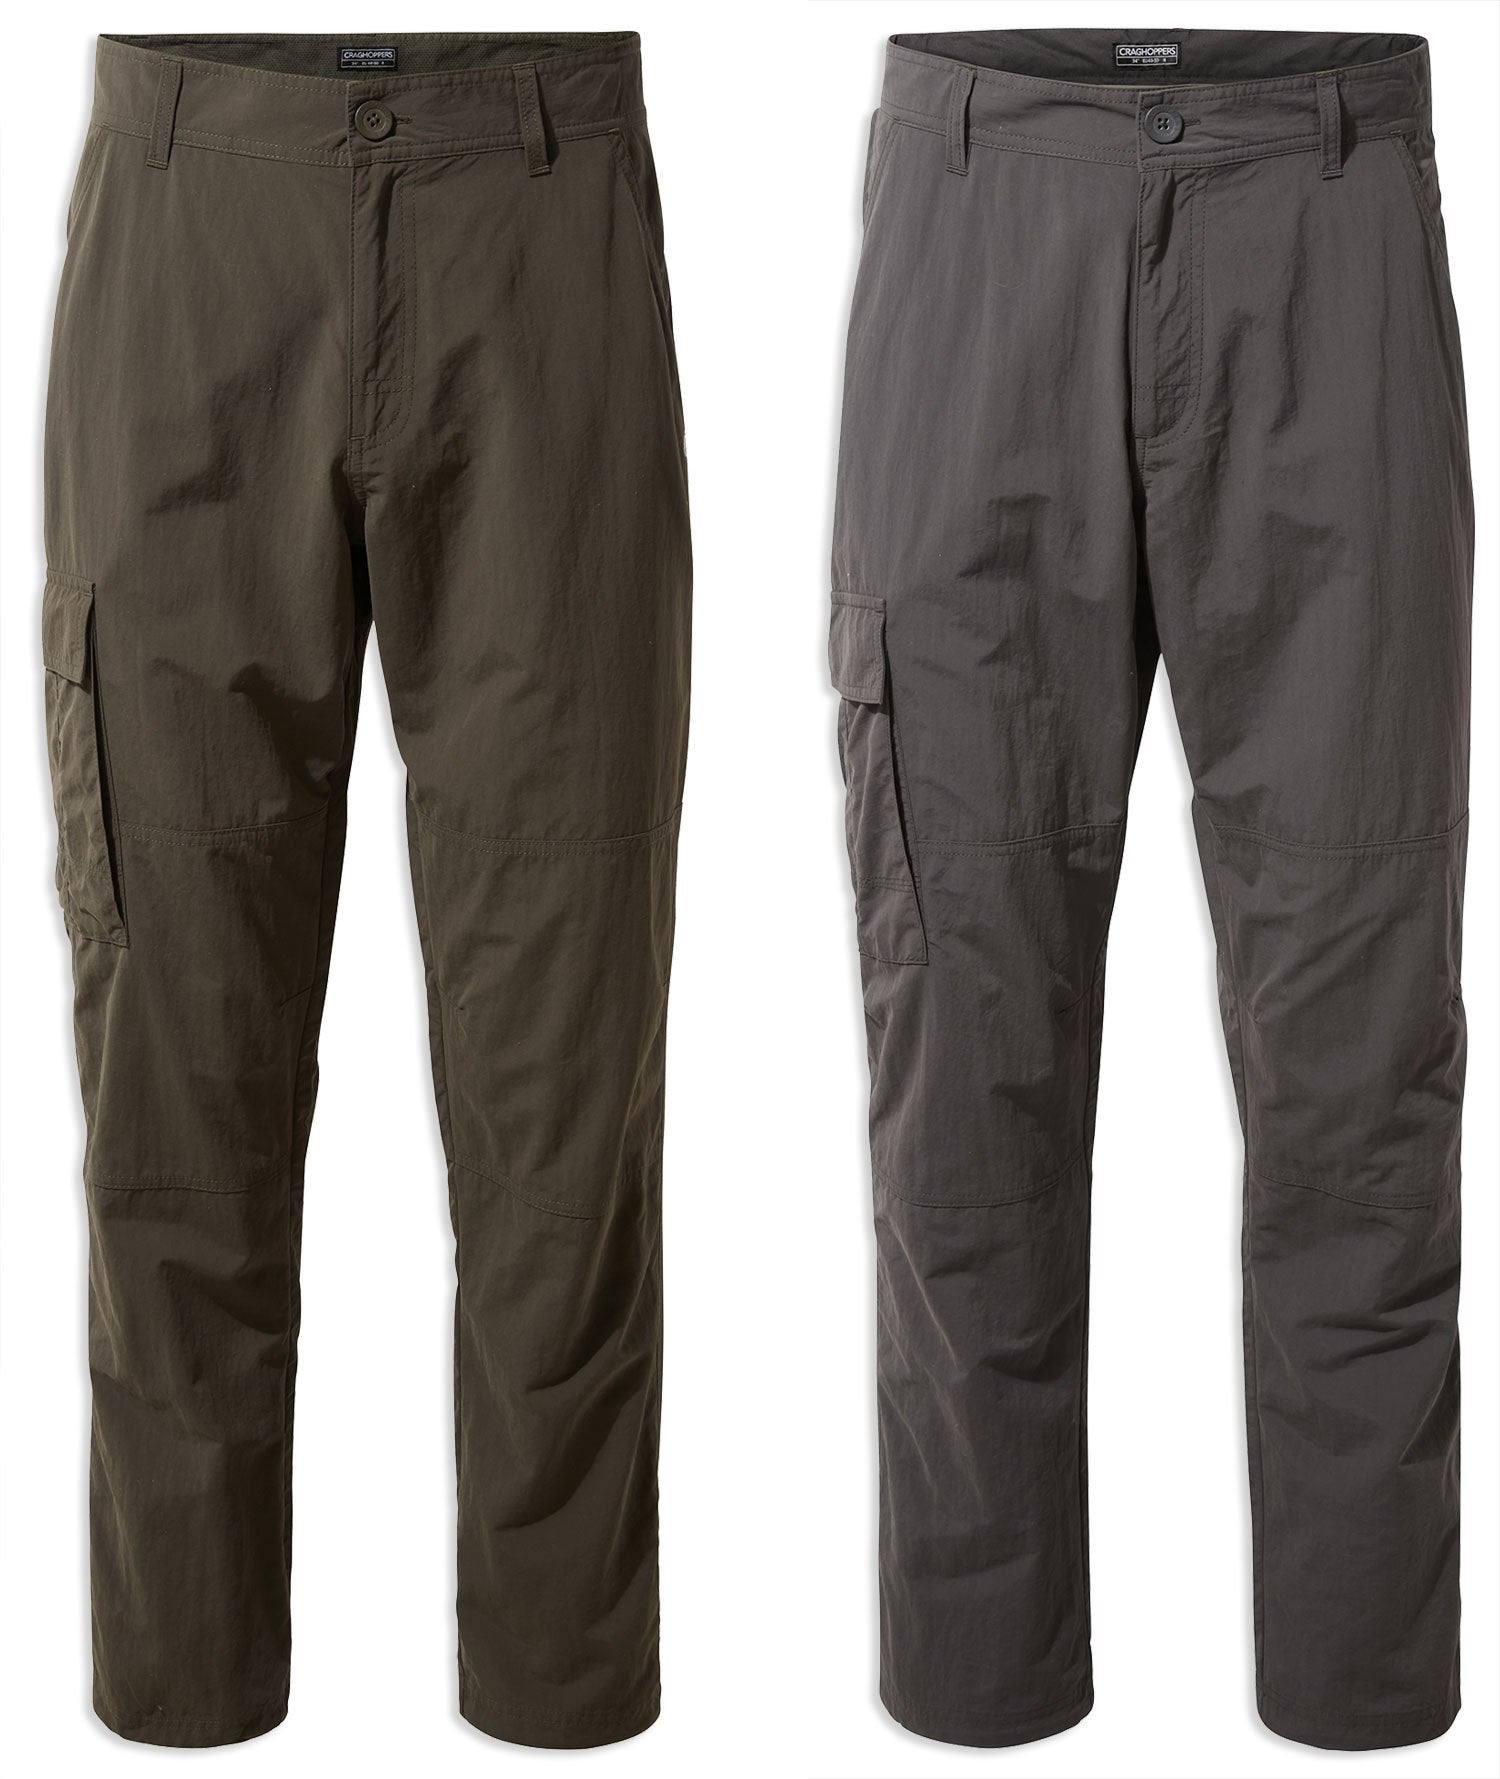 Craghoppers NosiLife Branco Trousers in Black Pepper and Woodland Green